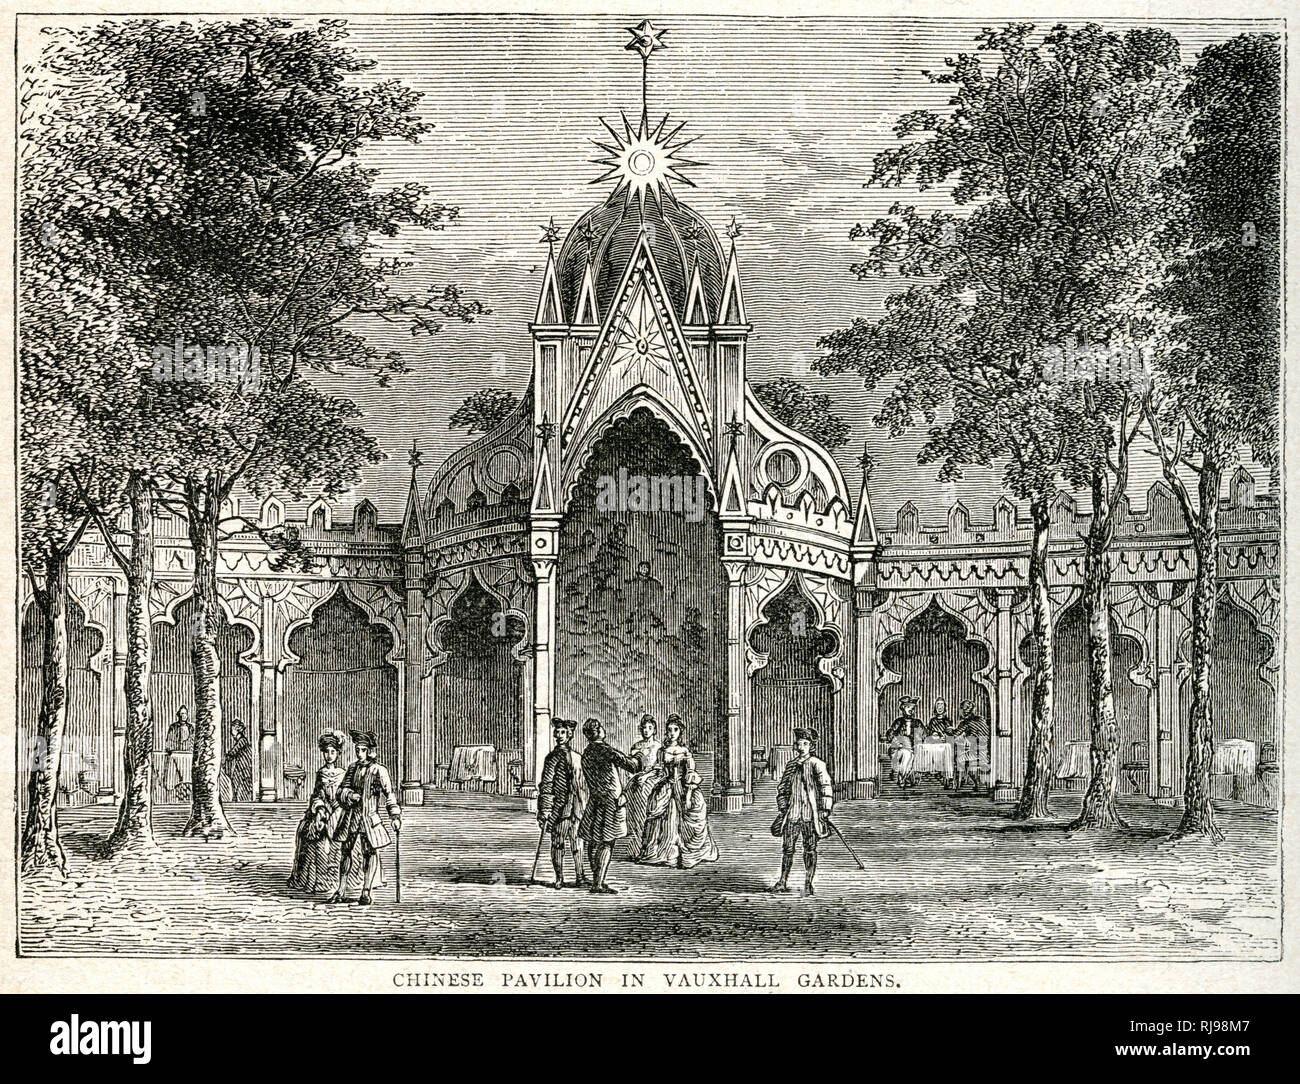 Chinese Pavilion in Vauxhall Gardens 1849 Stock Photo